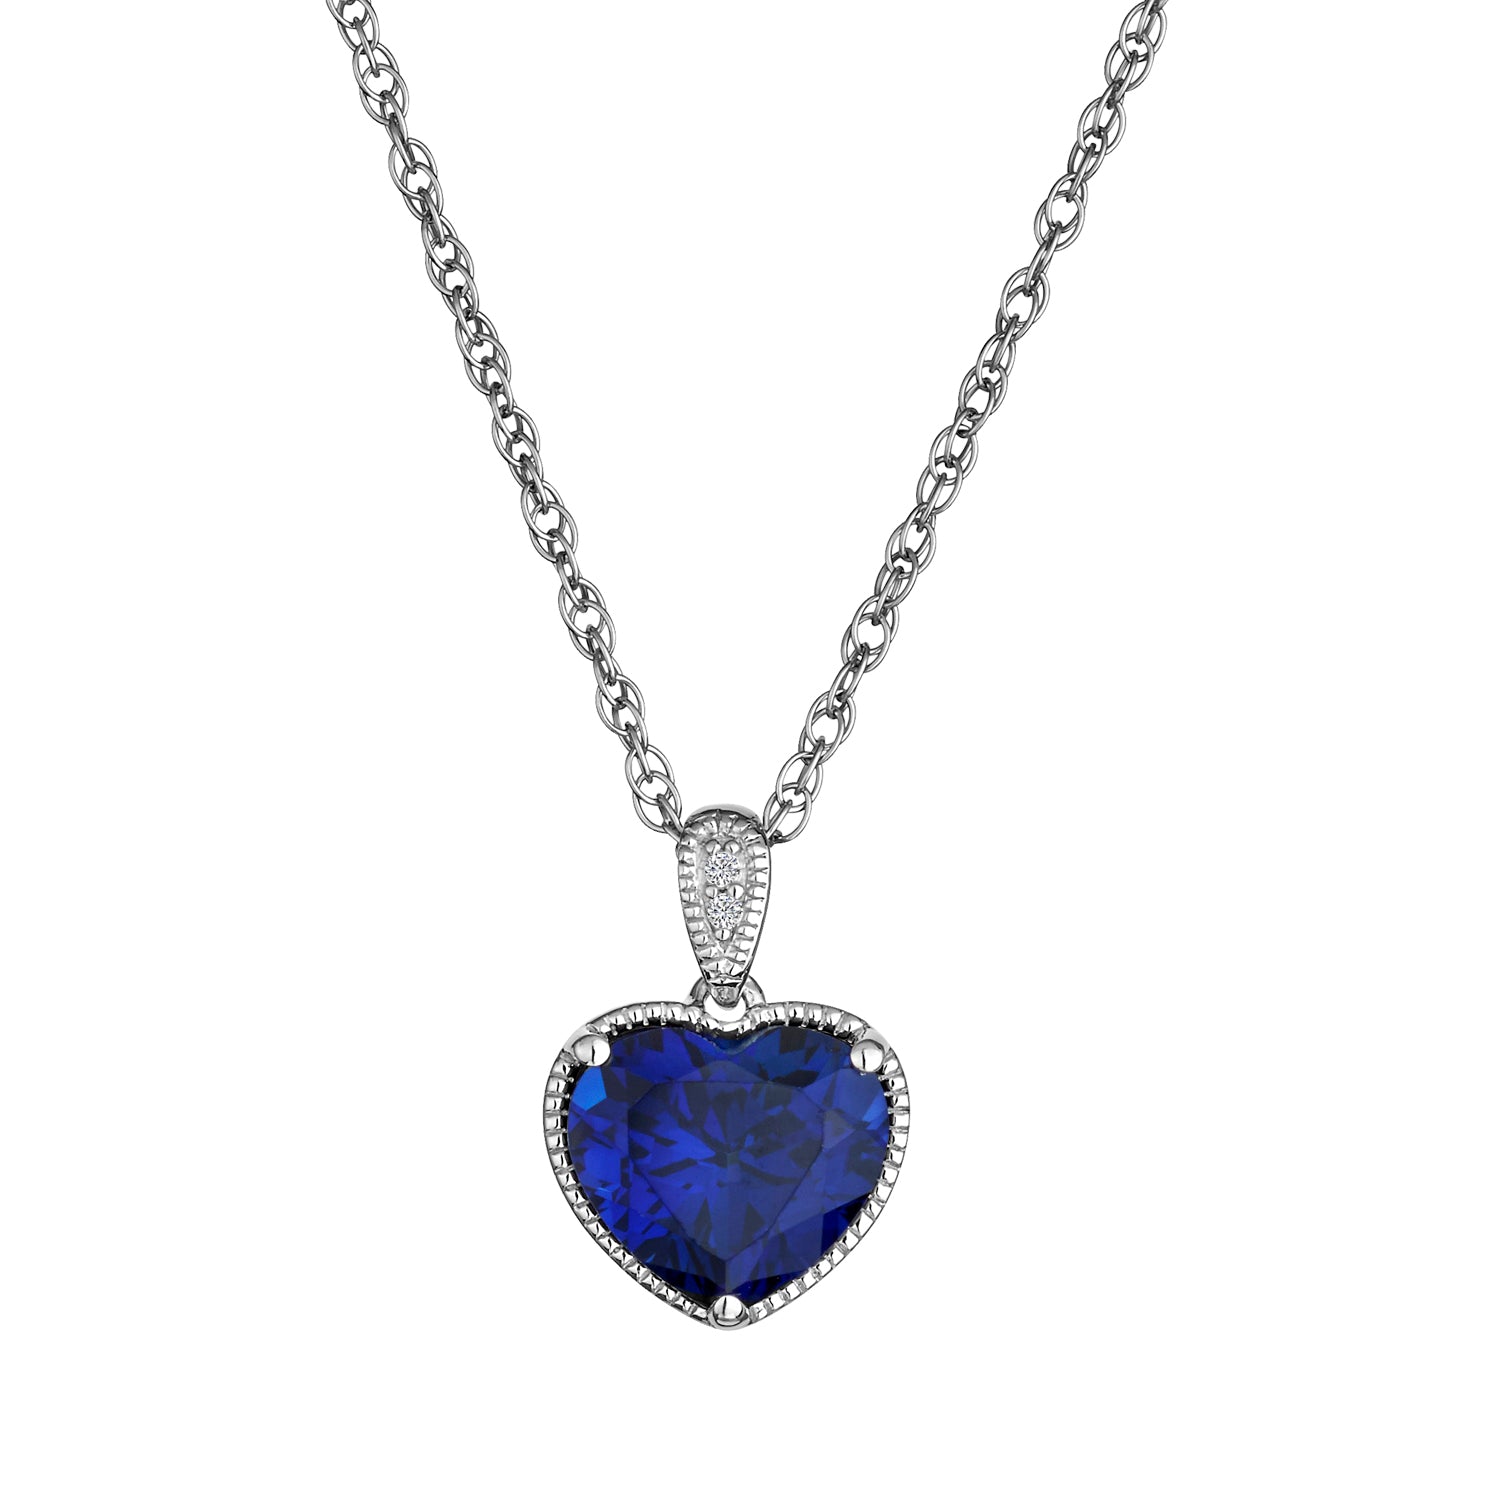 Created Blue & White Sapphire Heart Pendant,  Sterling Silver. Necklaces and Pendants. Griffin Jewellery Designs. 